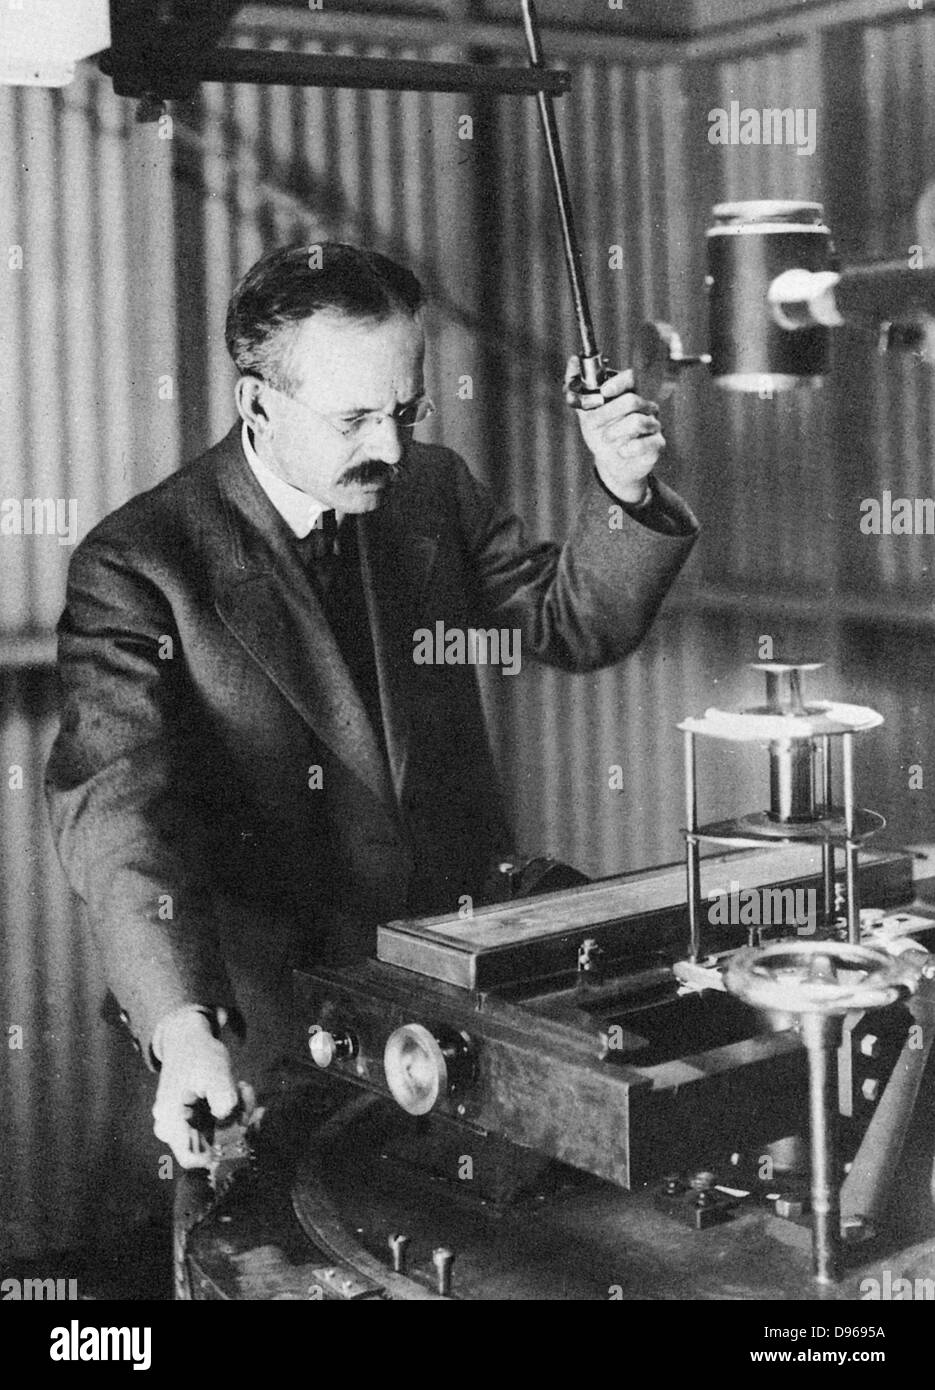 George Ellery Hale (1868-1938) American astronomer. Director of Yerkes (1895-1905) and Mount Wilson (1904-1923) observatories. Research on sunspots. Hale in 1907 observing sunspots. Courtesy Mount Wilson and Palomar Observatories. Stock Photo